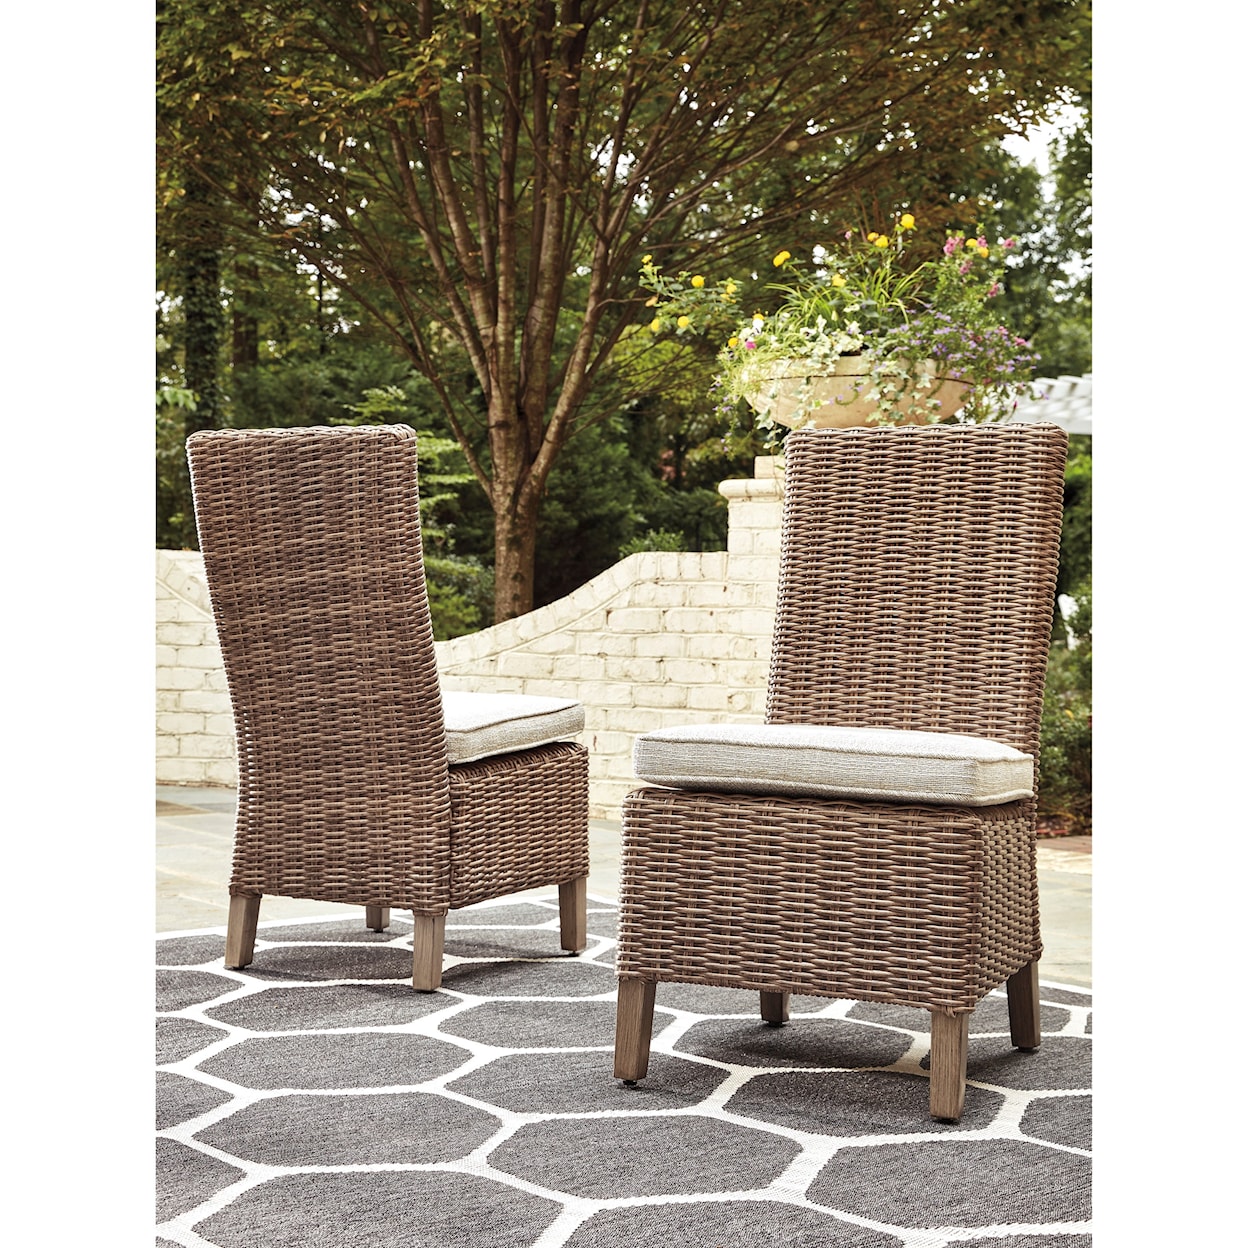 Signature Design by Ashley Beachcroft Set of 2 Side Chairs